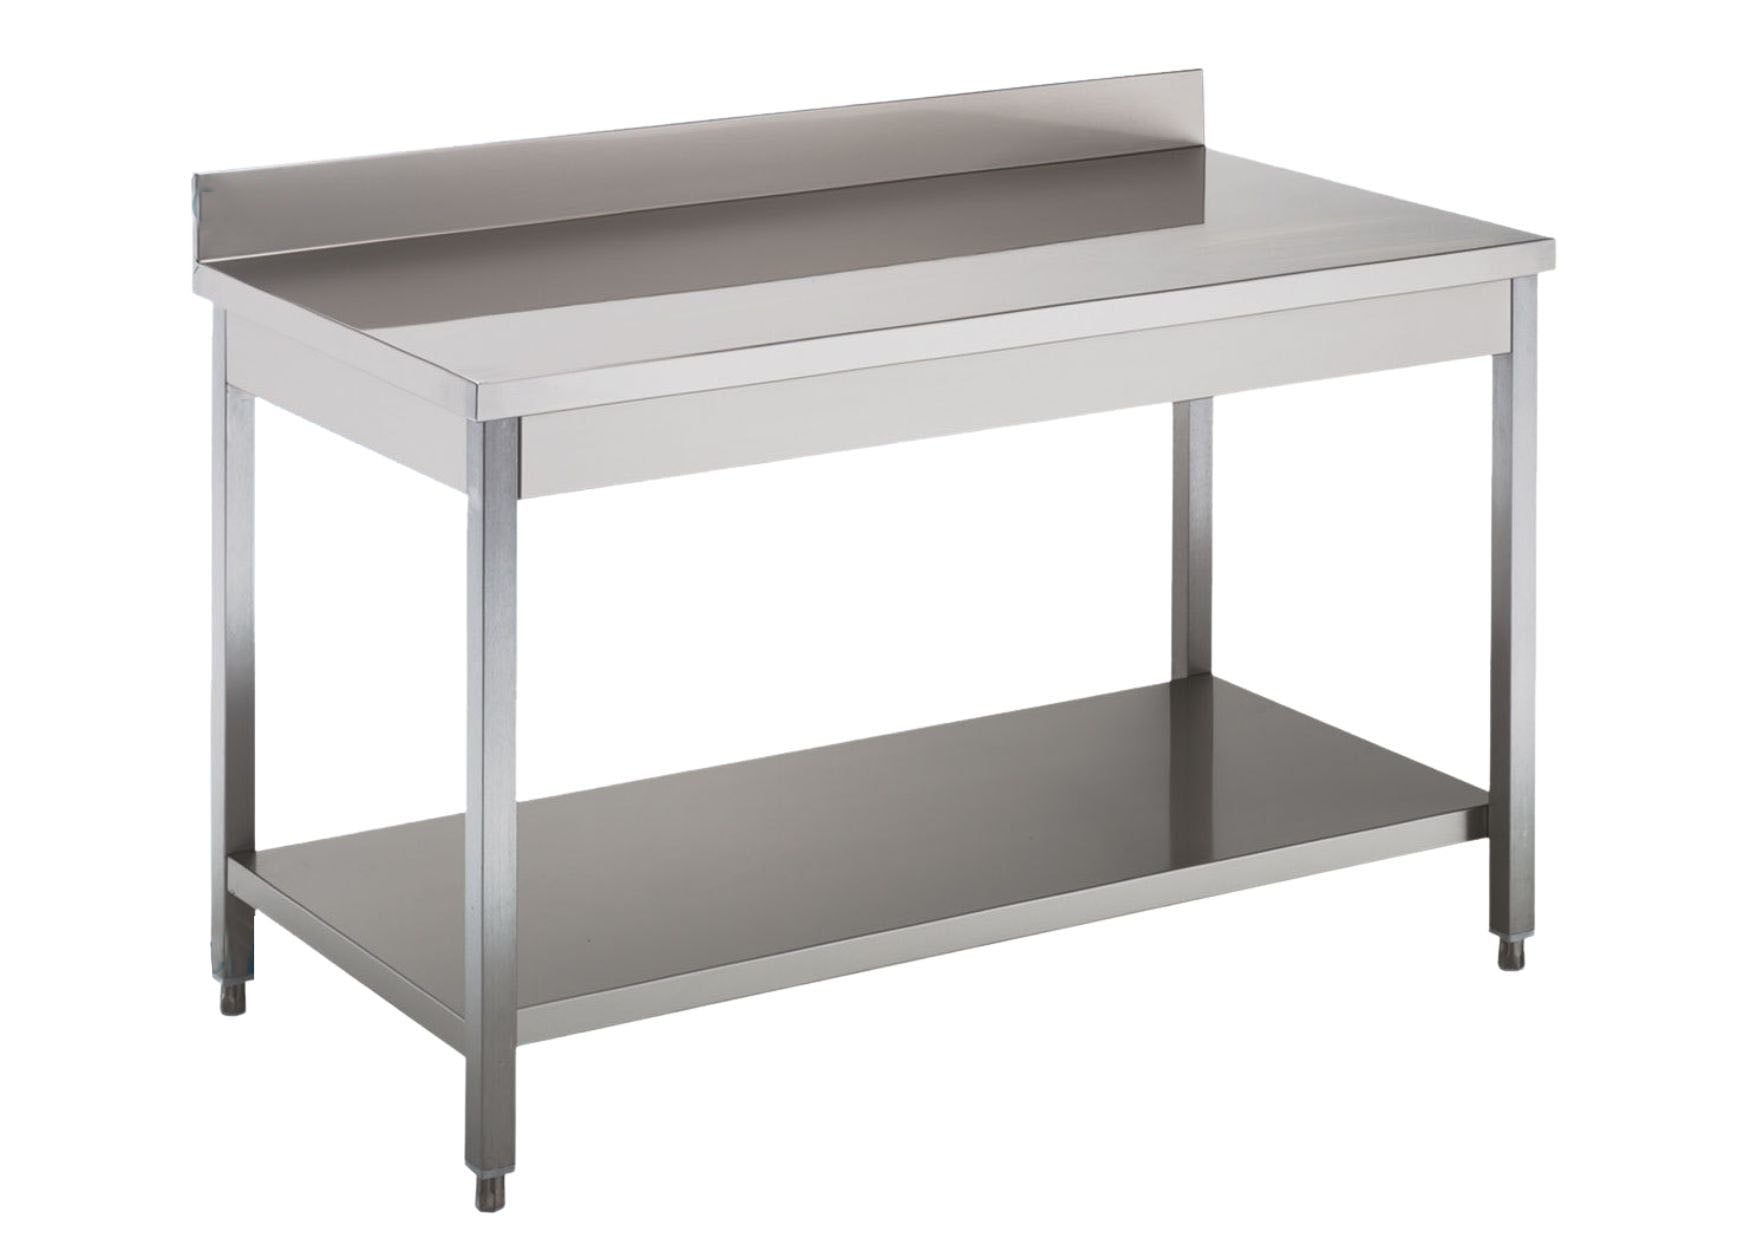 Stainless steel work table open with shelf